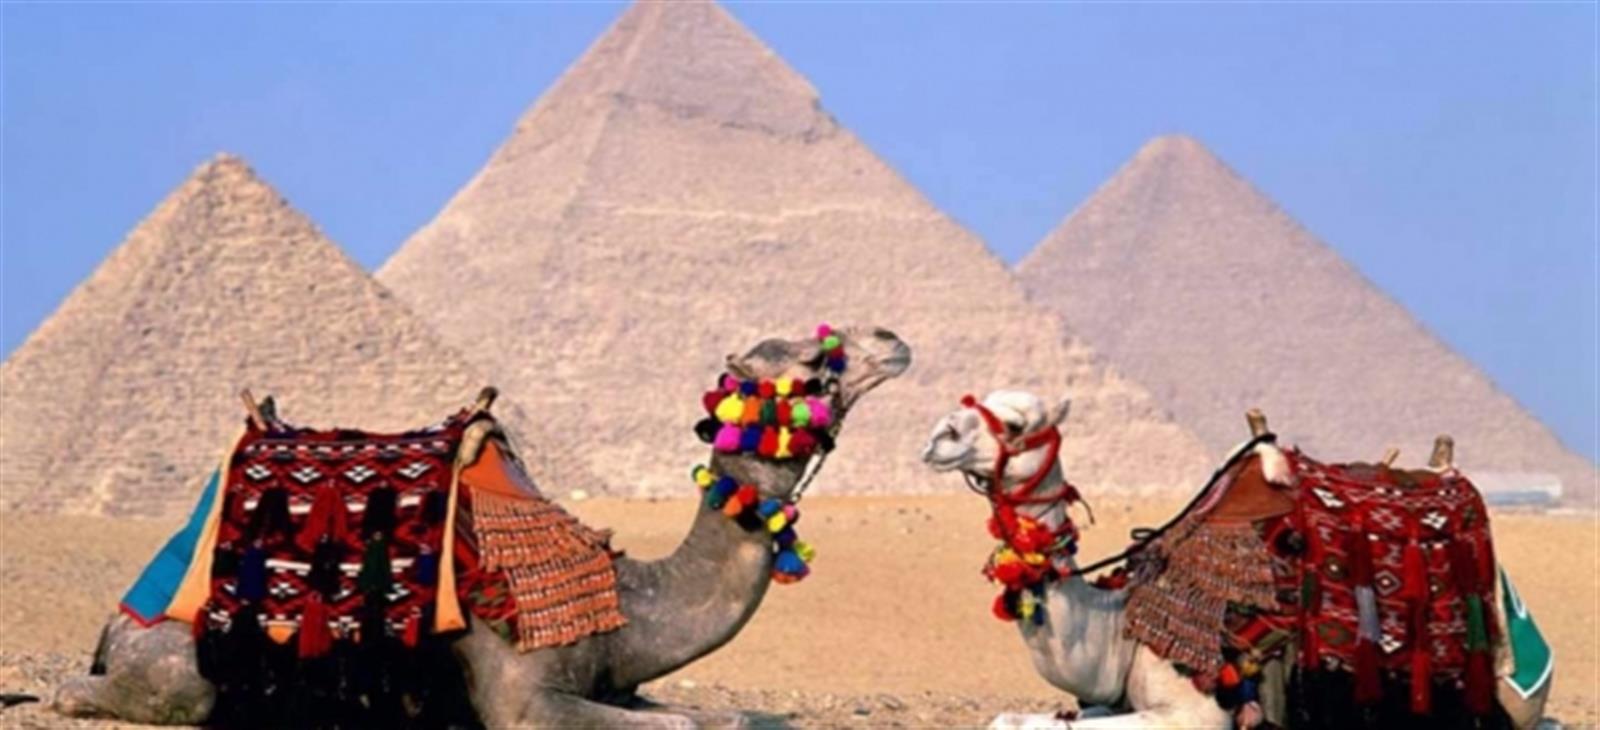 tour to cairo from sharm el sheikh by plane